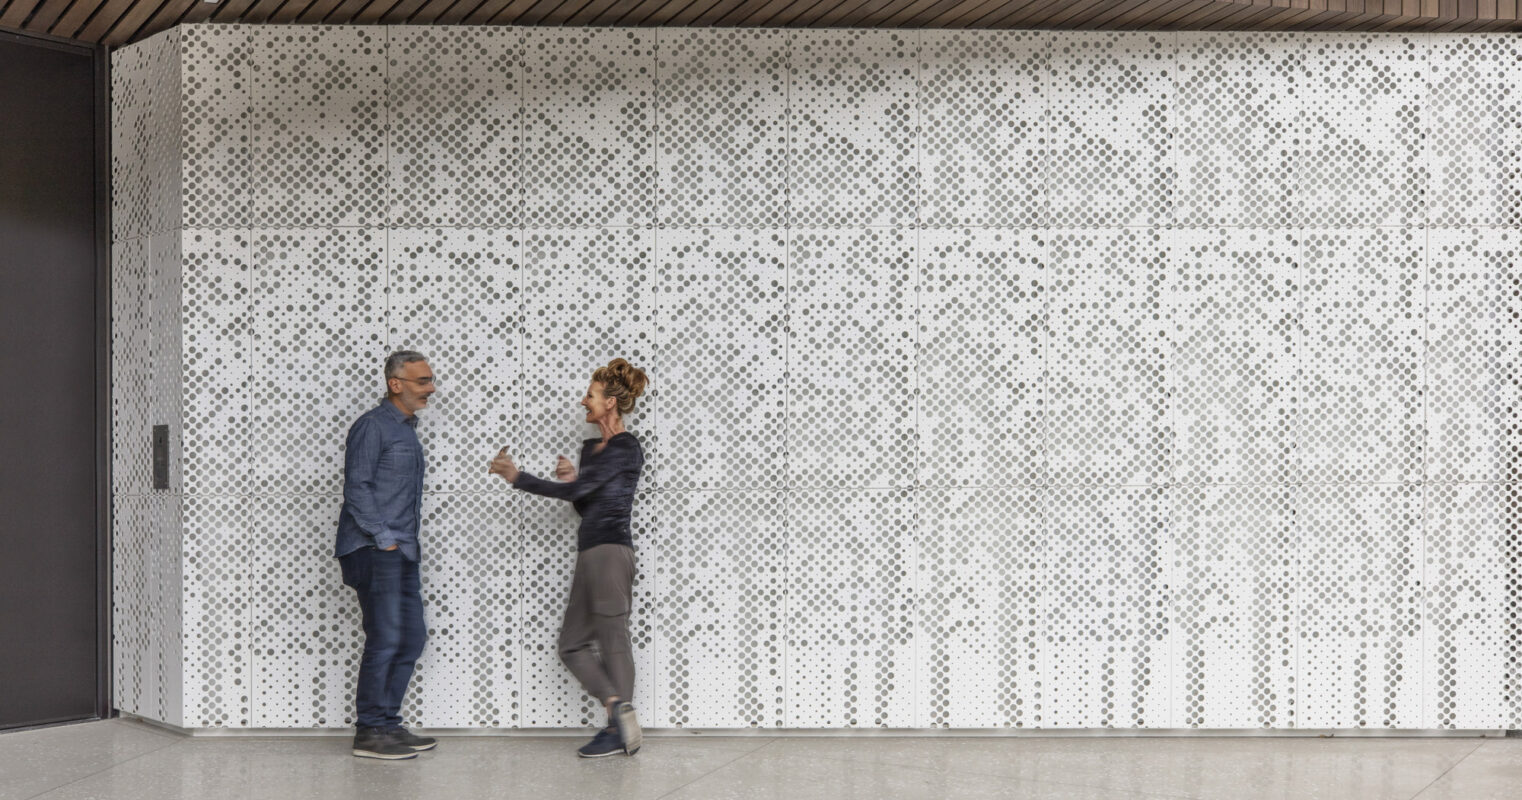 Two individuals converse in a modern hallway featuring a geometric-patterned perforated metal screen wall, providing both privacy and light diffusion, accented by a warm wood ceiling and minimalist design.